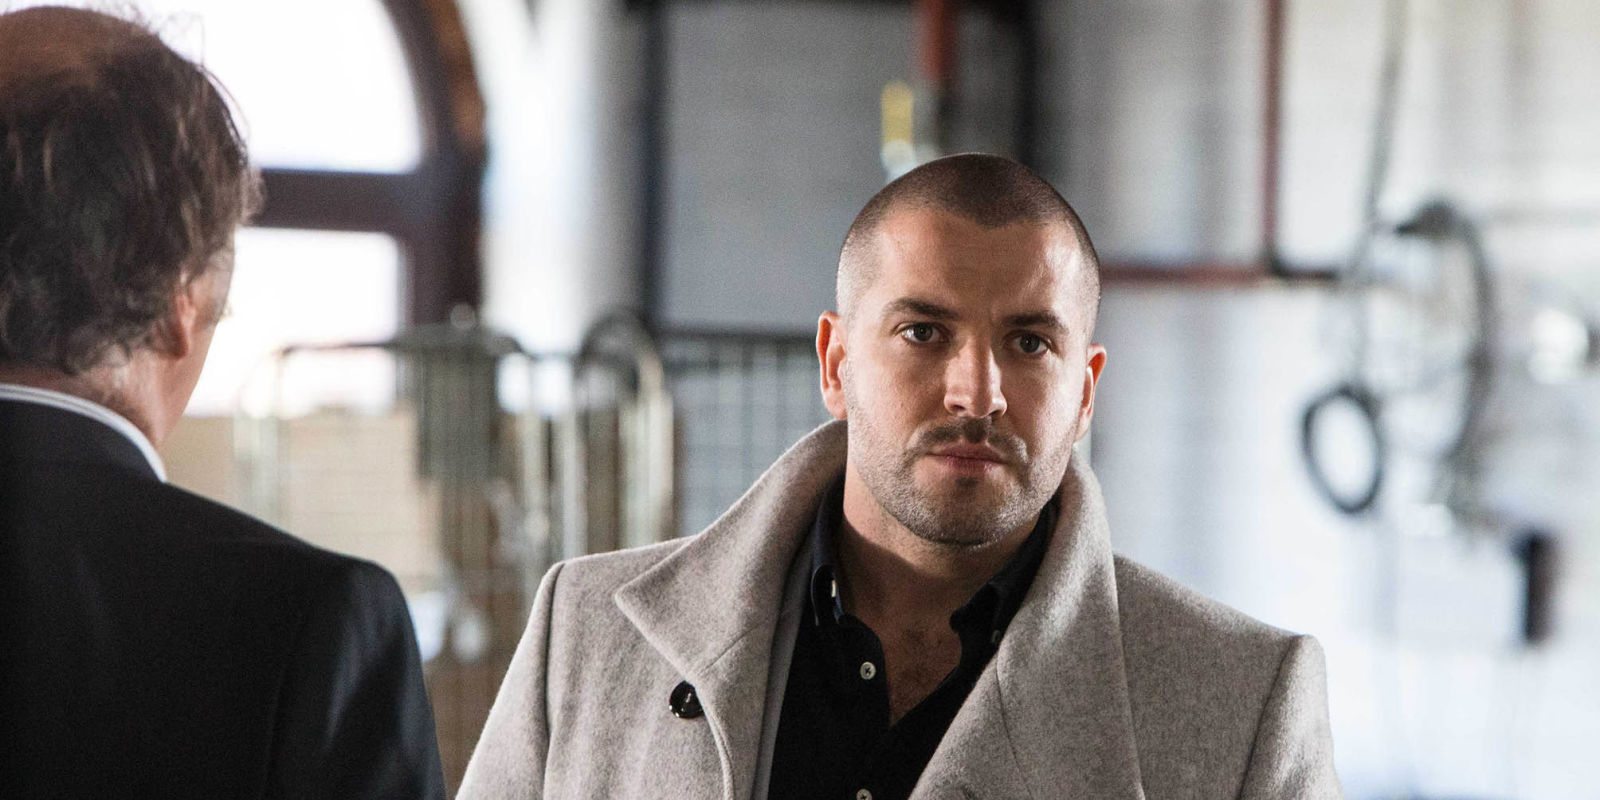 Shayne Ward has a new look since leaving Corrie and fans are loving it